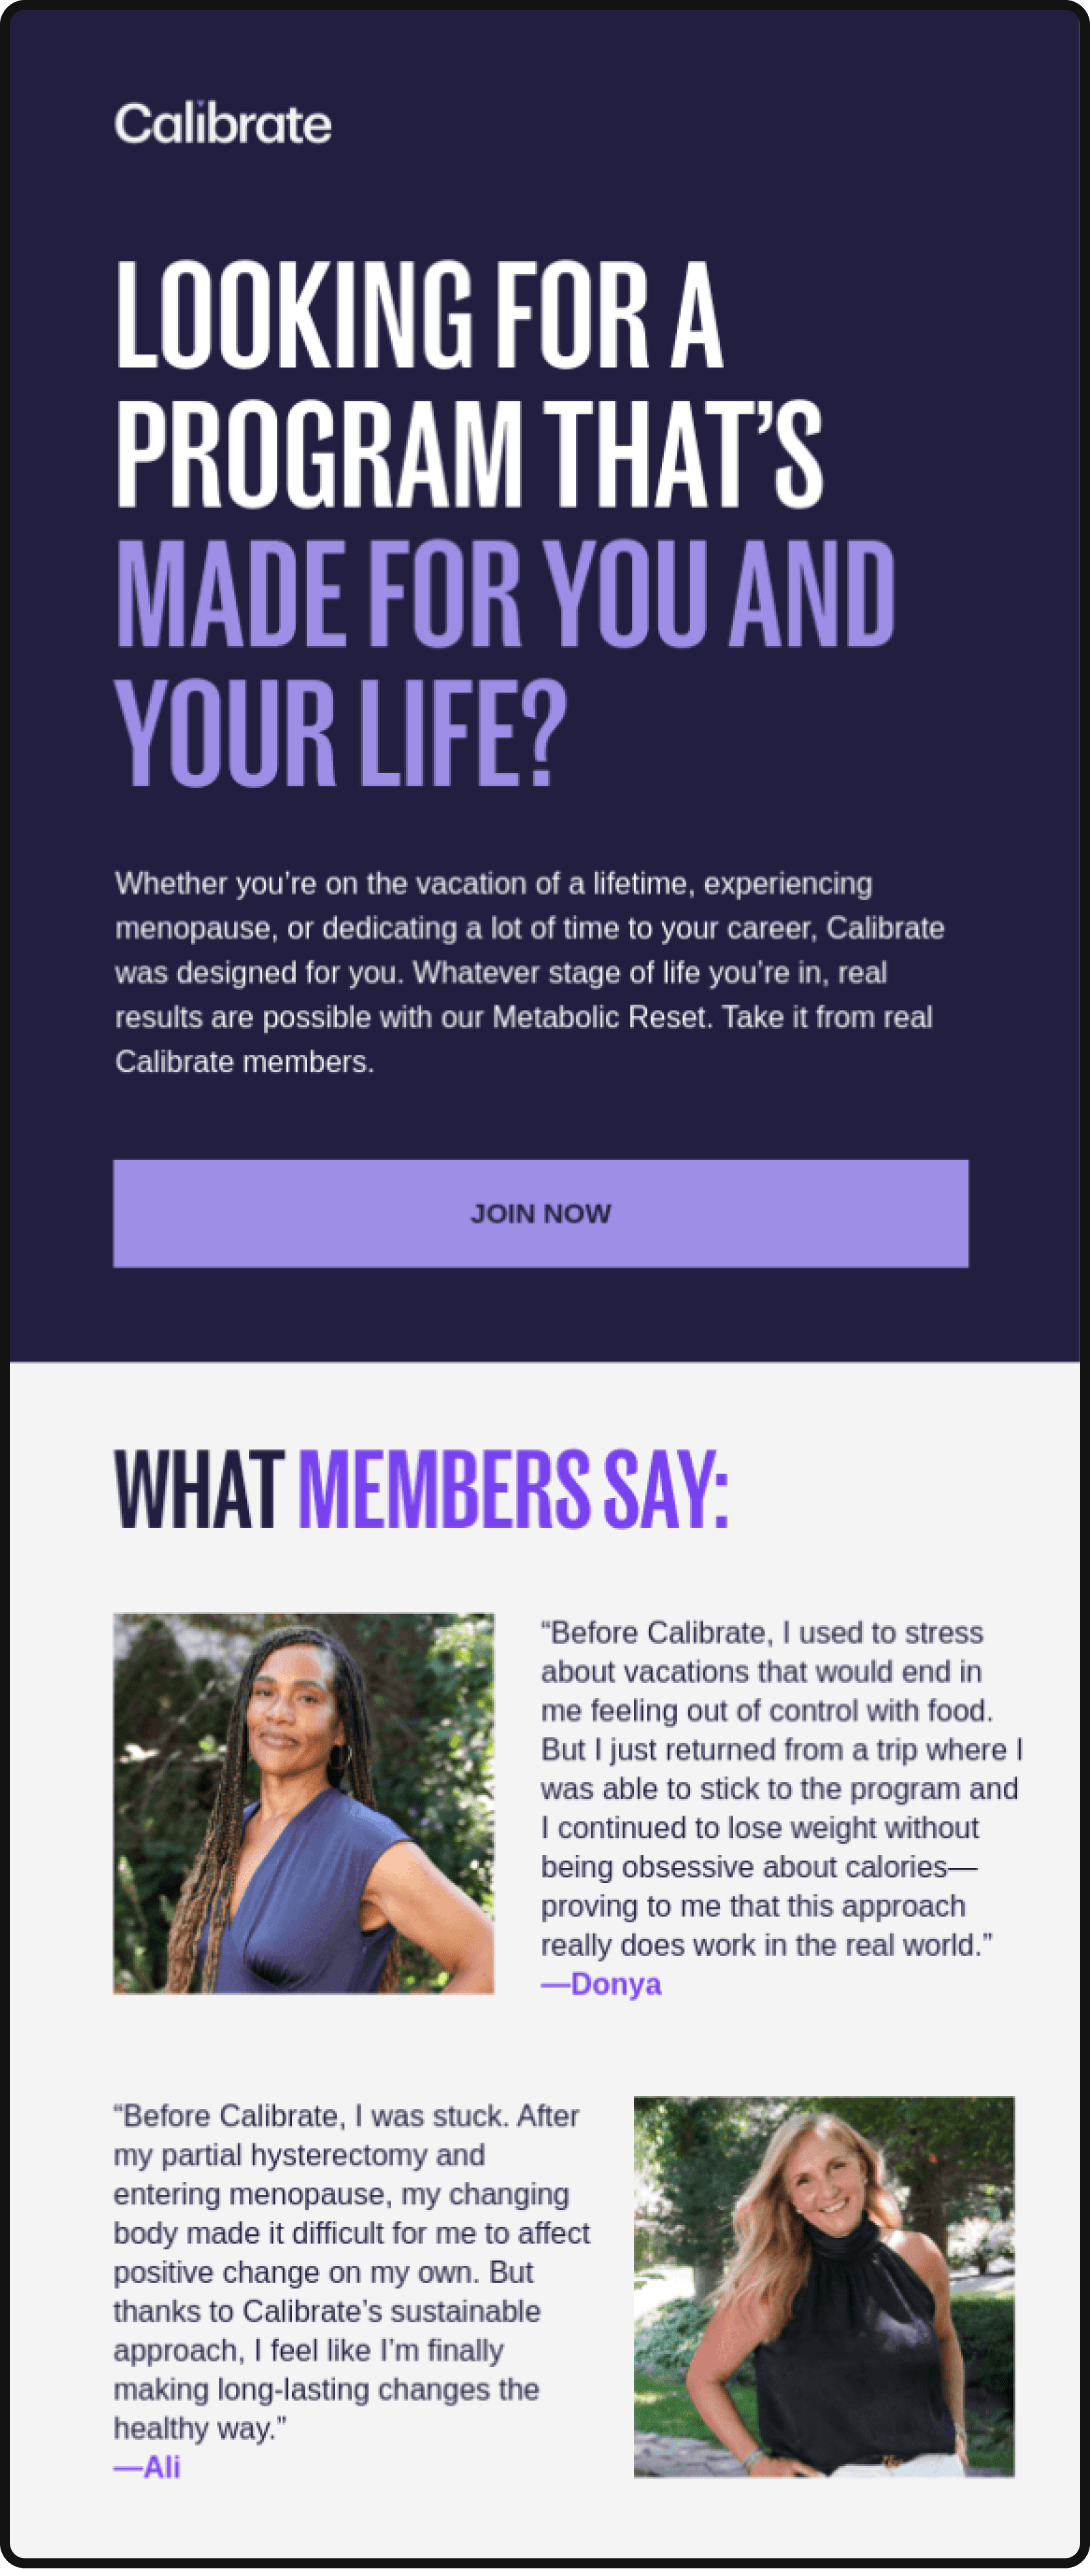 Calibrate: Looking for a program that's made for you and your life?